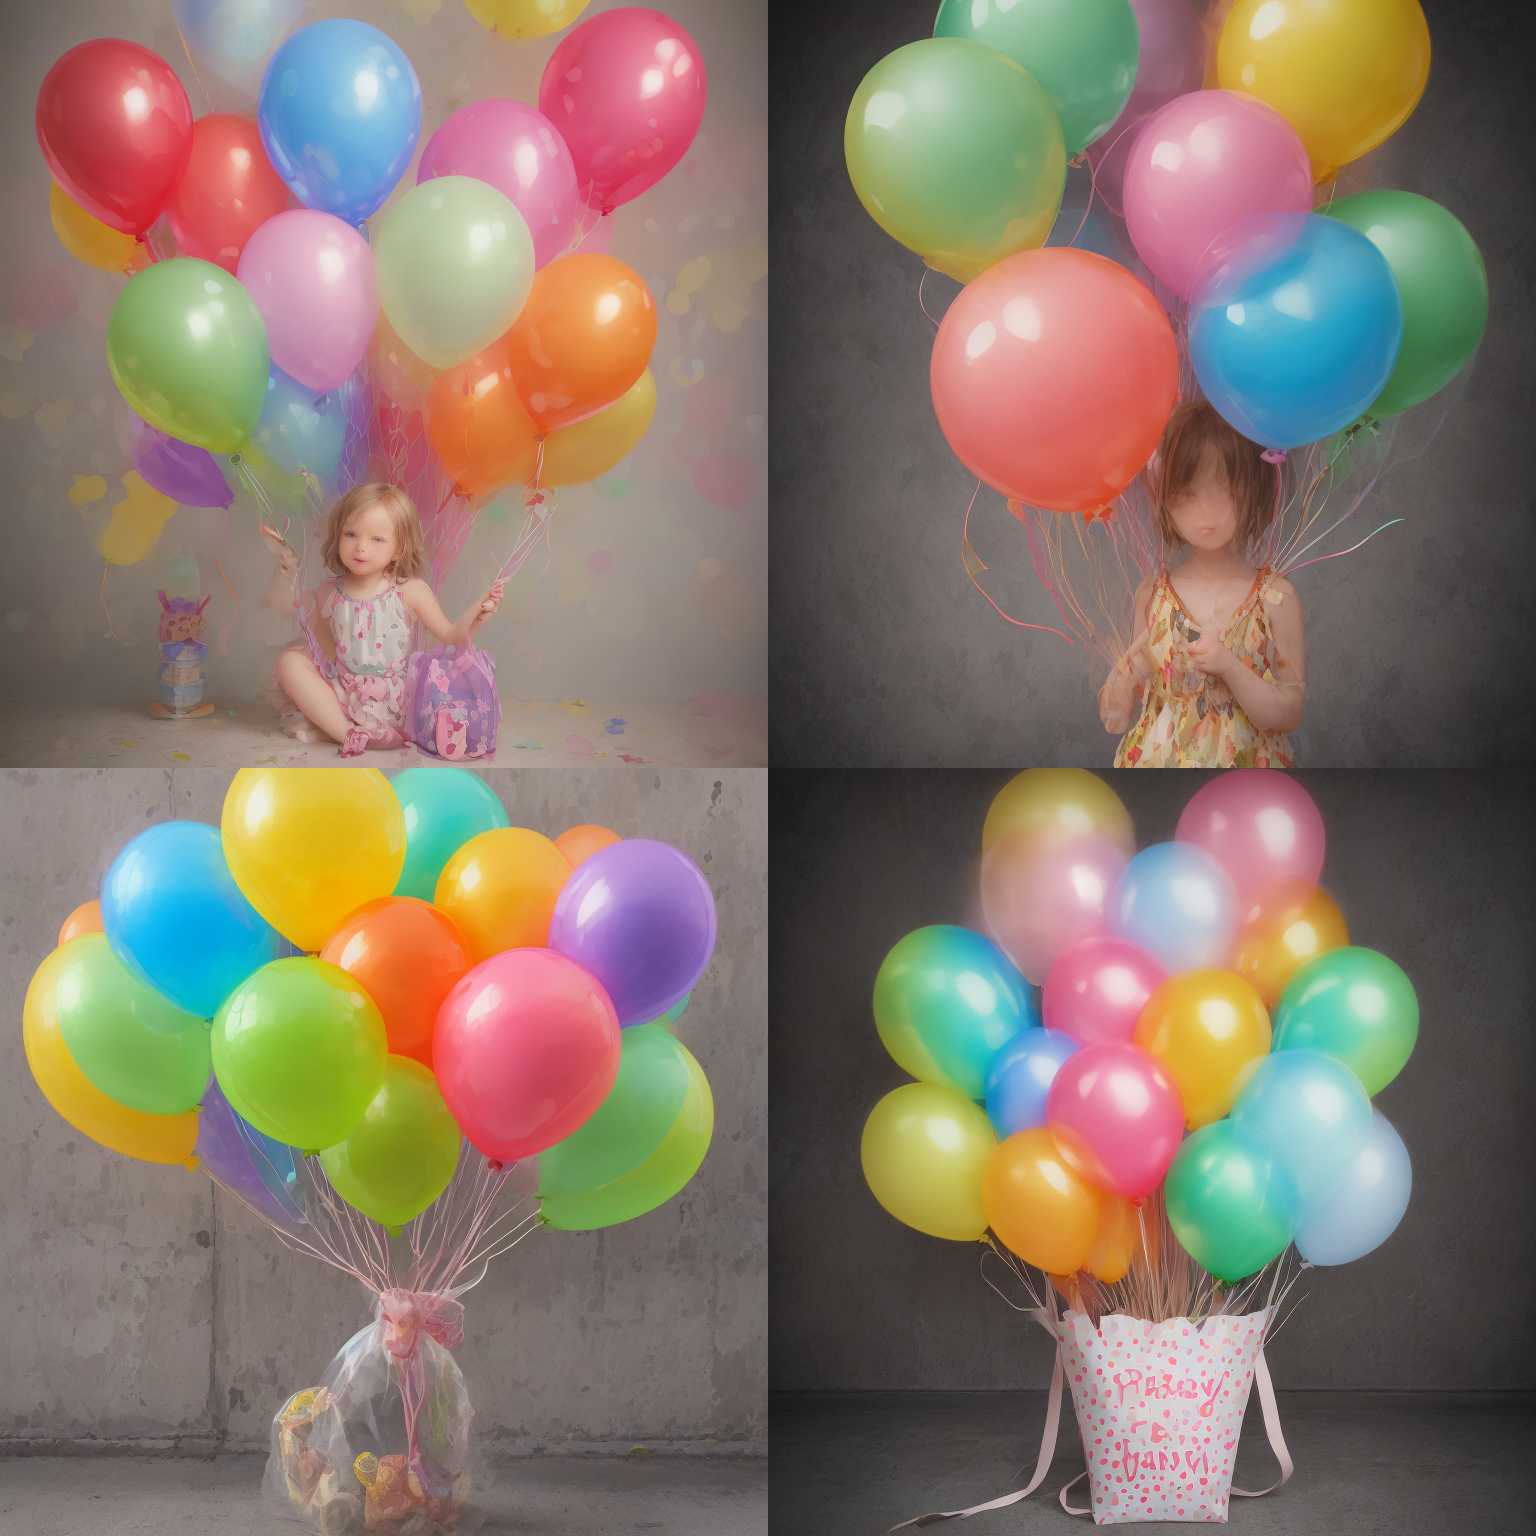 A small bag of party balloons for sale